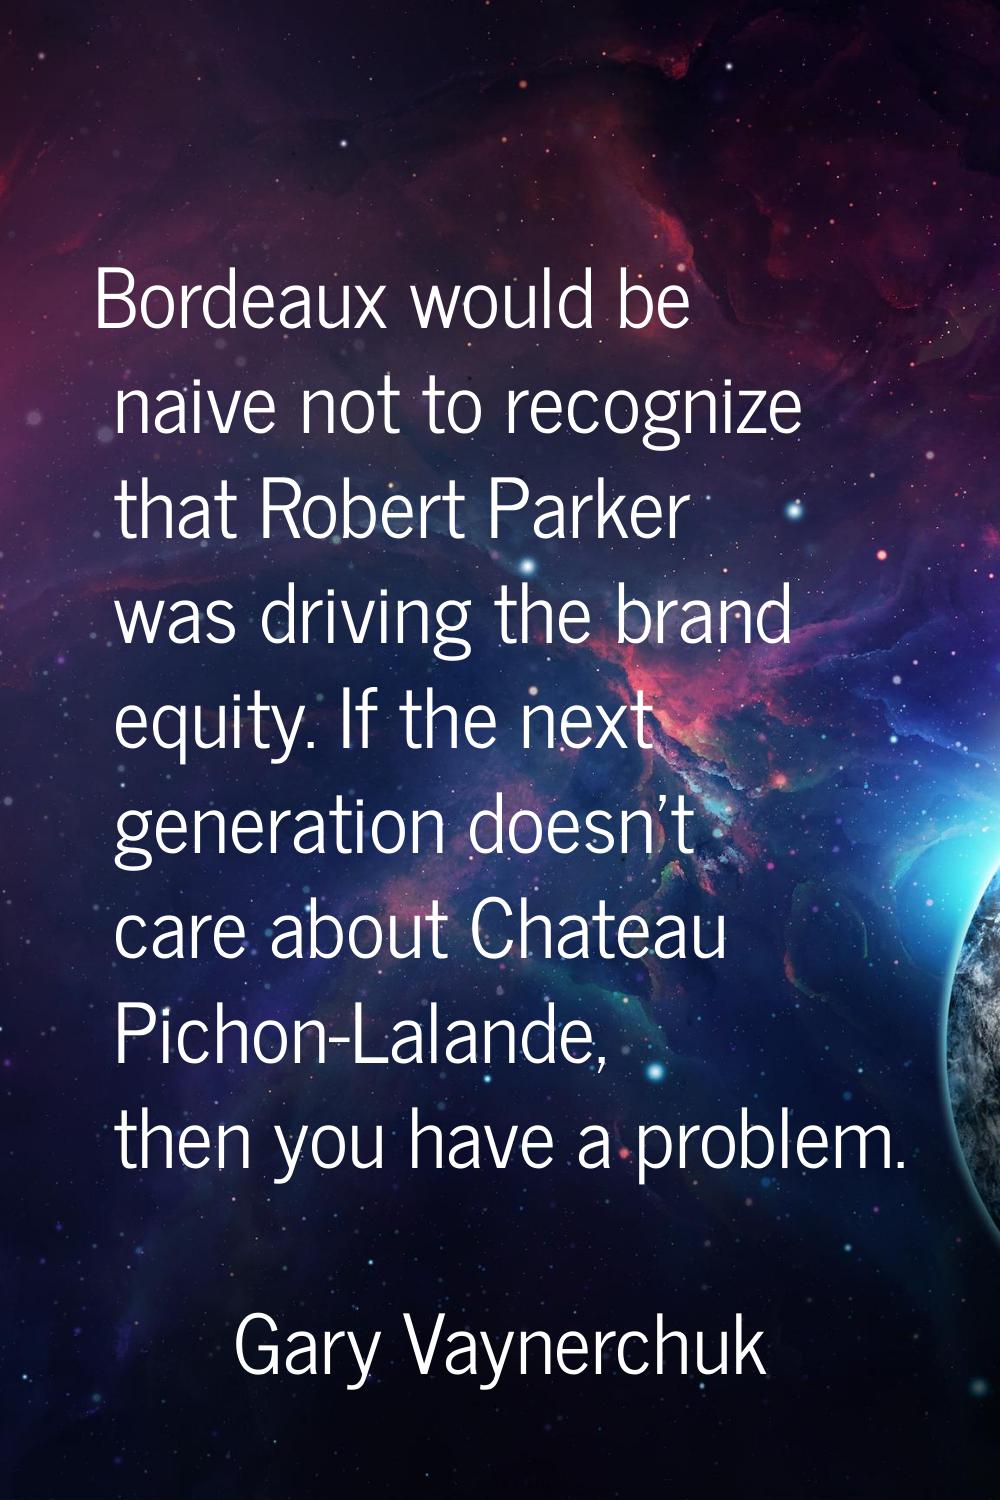 Bordeaux would be naive not to recognize that Robert Parker was driving the brand equity. If the ne